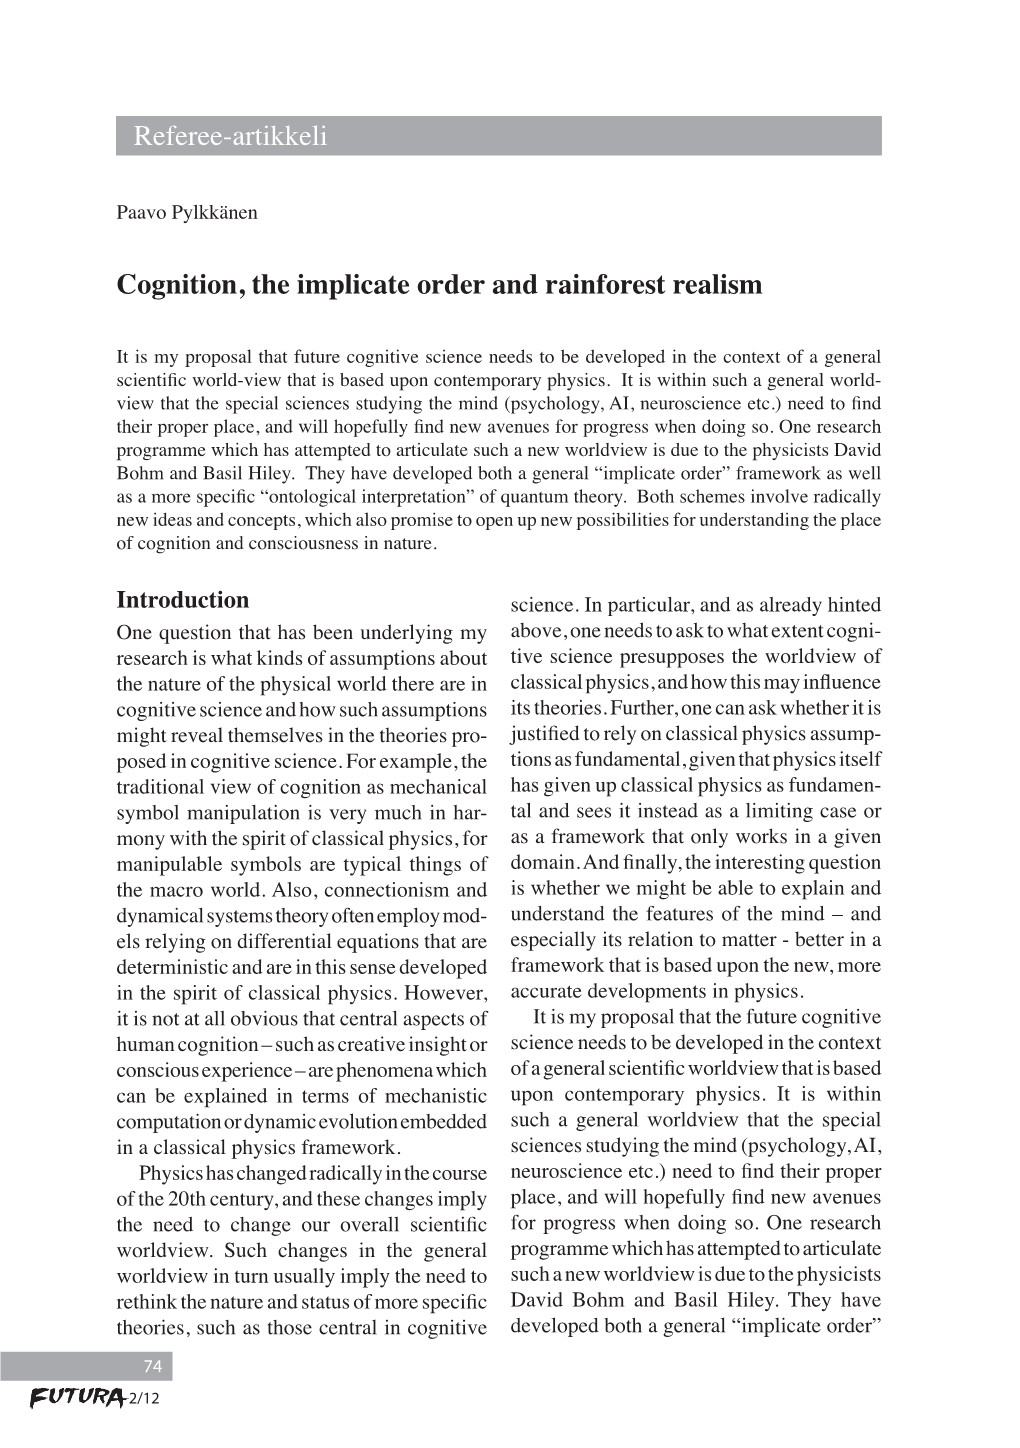 Cognition, the Implicate Order and Rainforest Realism